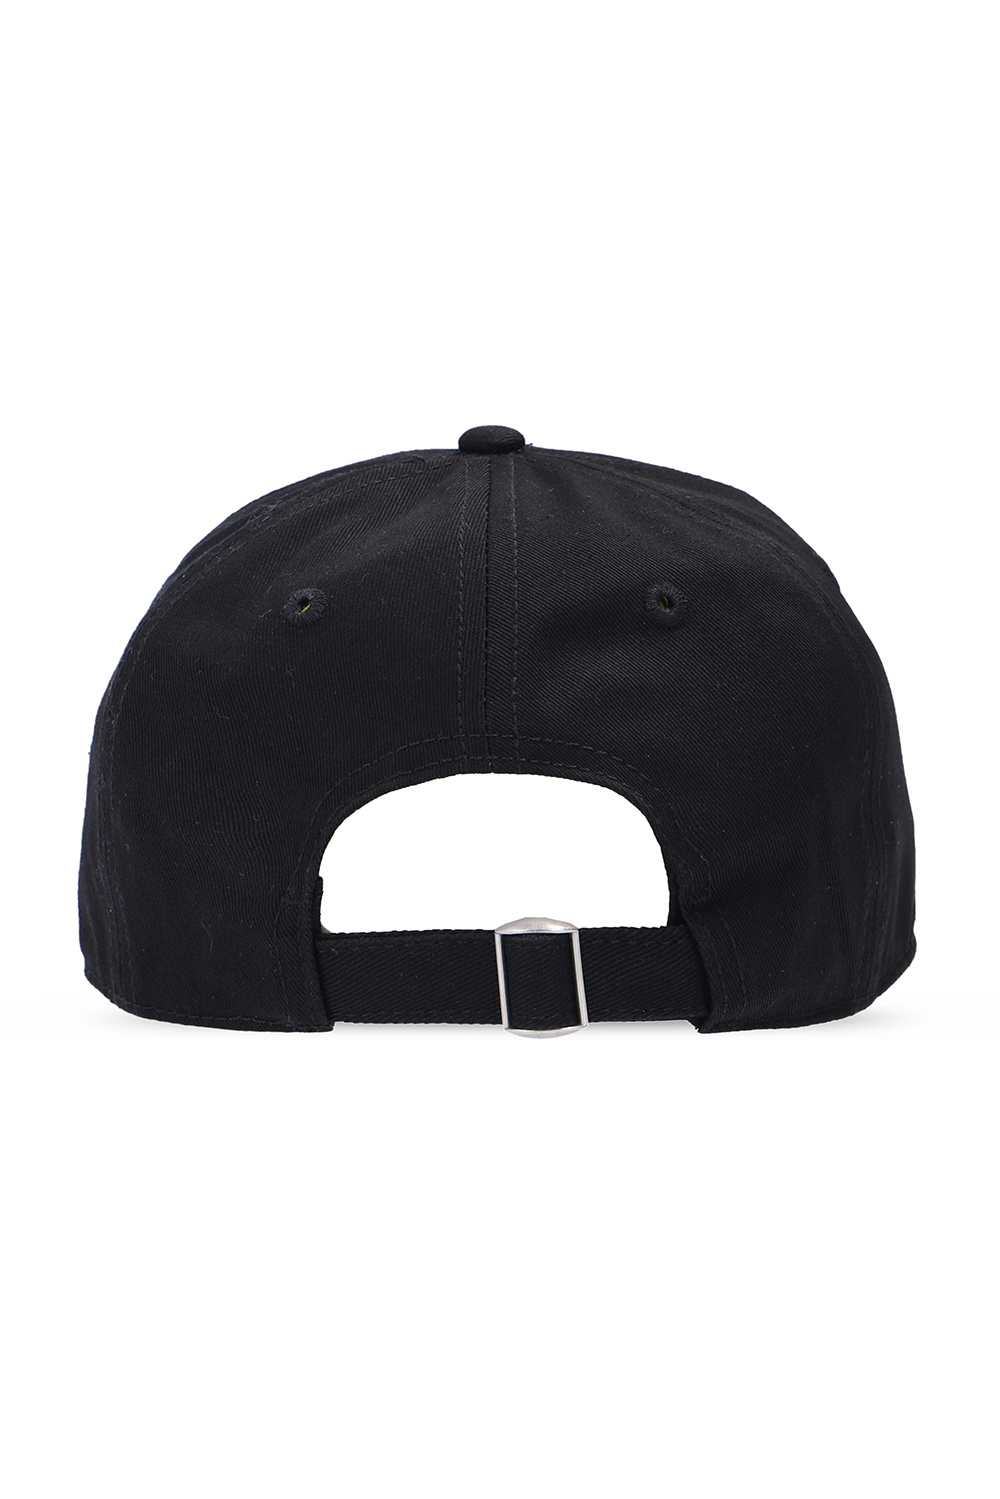 Off-White Kids the north face extreme ball cap